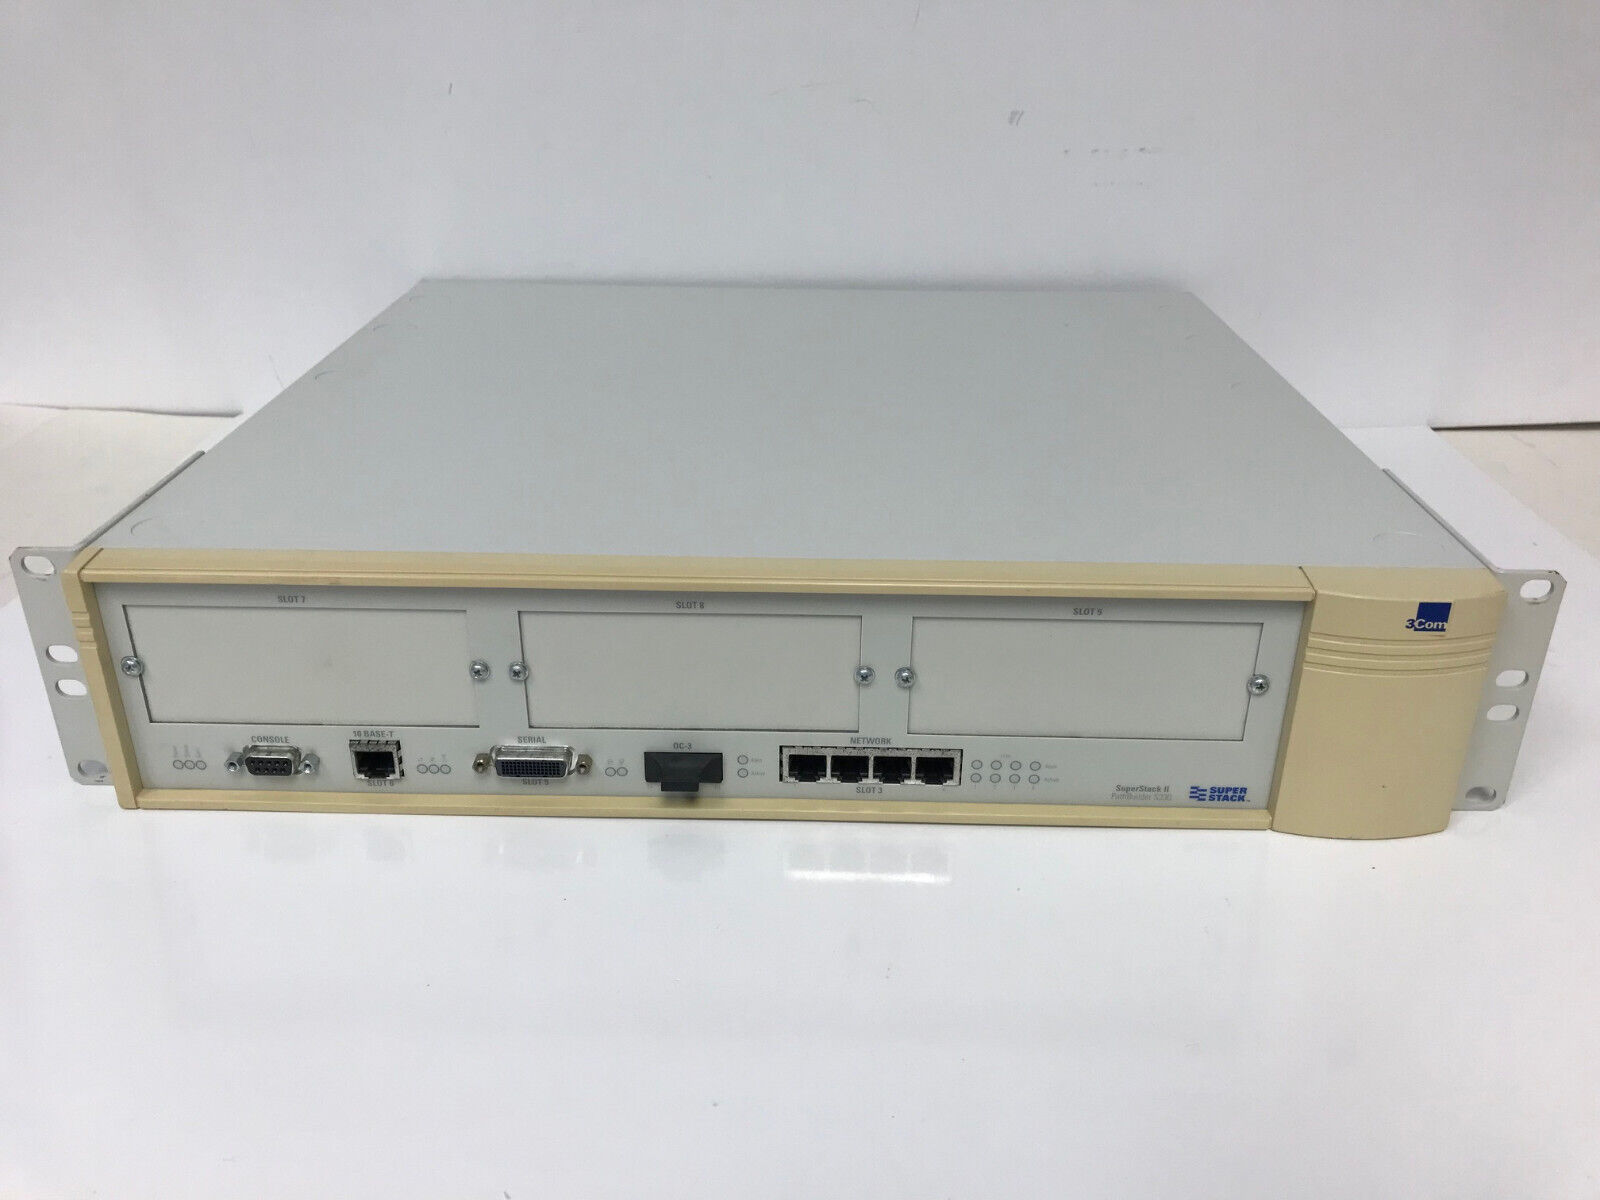 3COM 3C63300A-AC-NC SUPER STACK II PATHBIULDER S330 AS-IS FOR PARTS/REPAIR